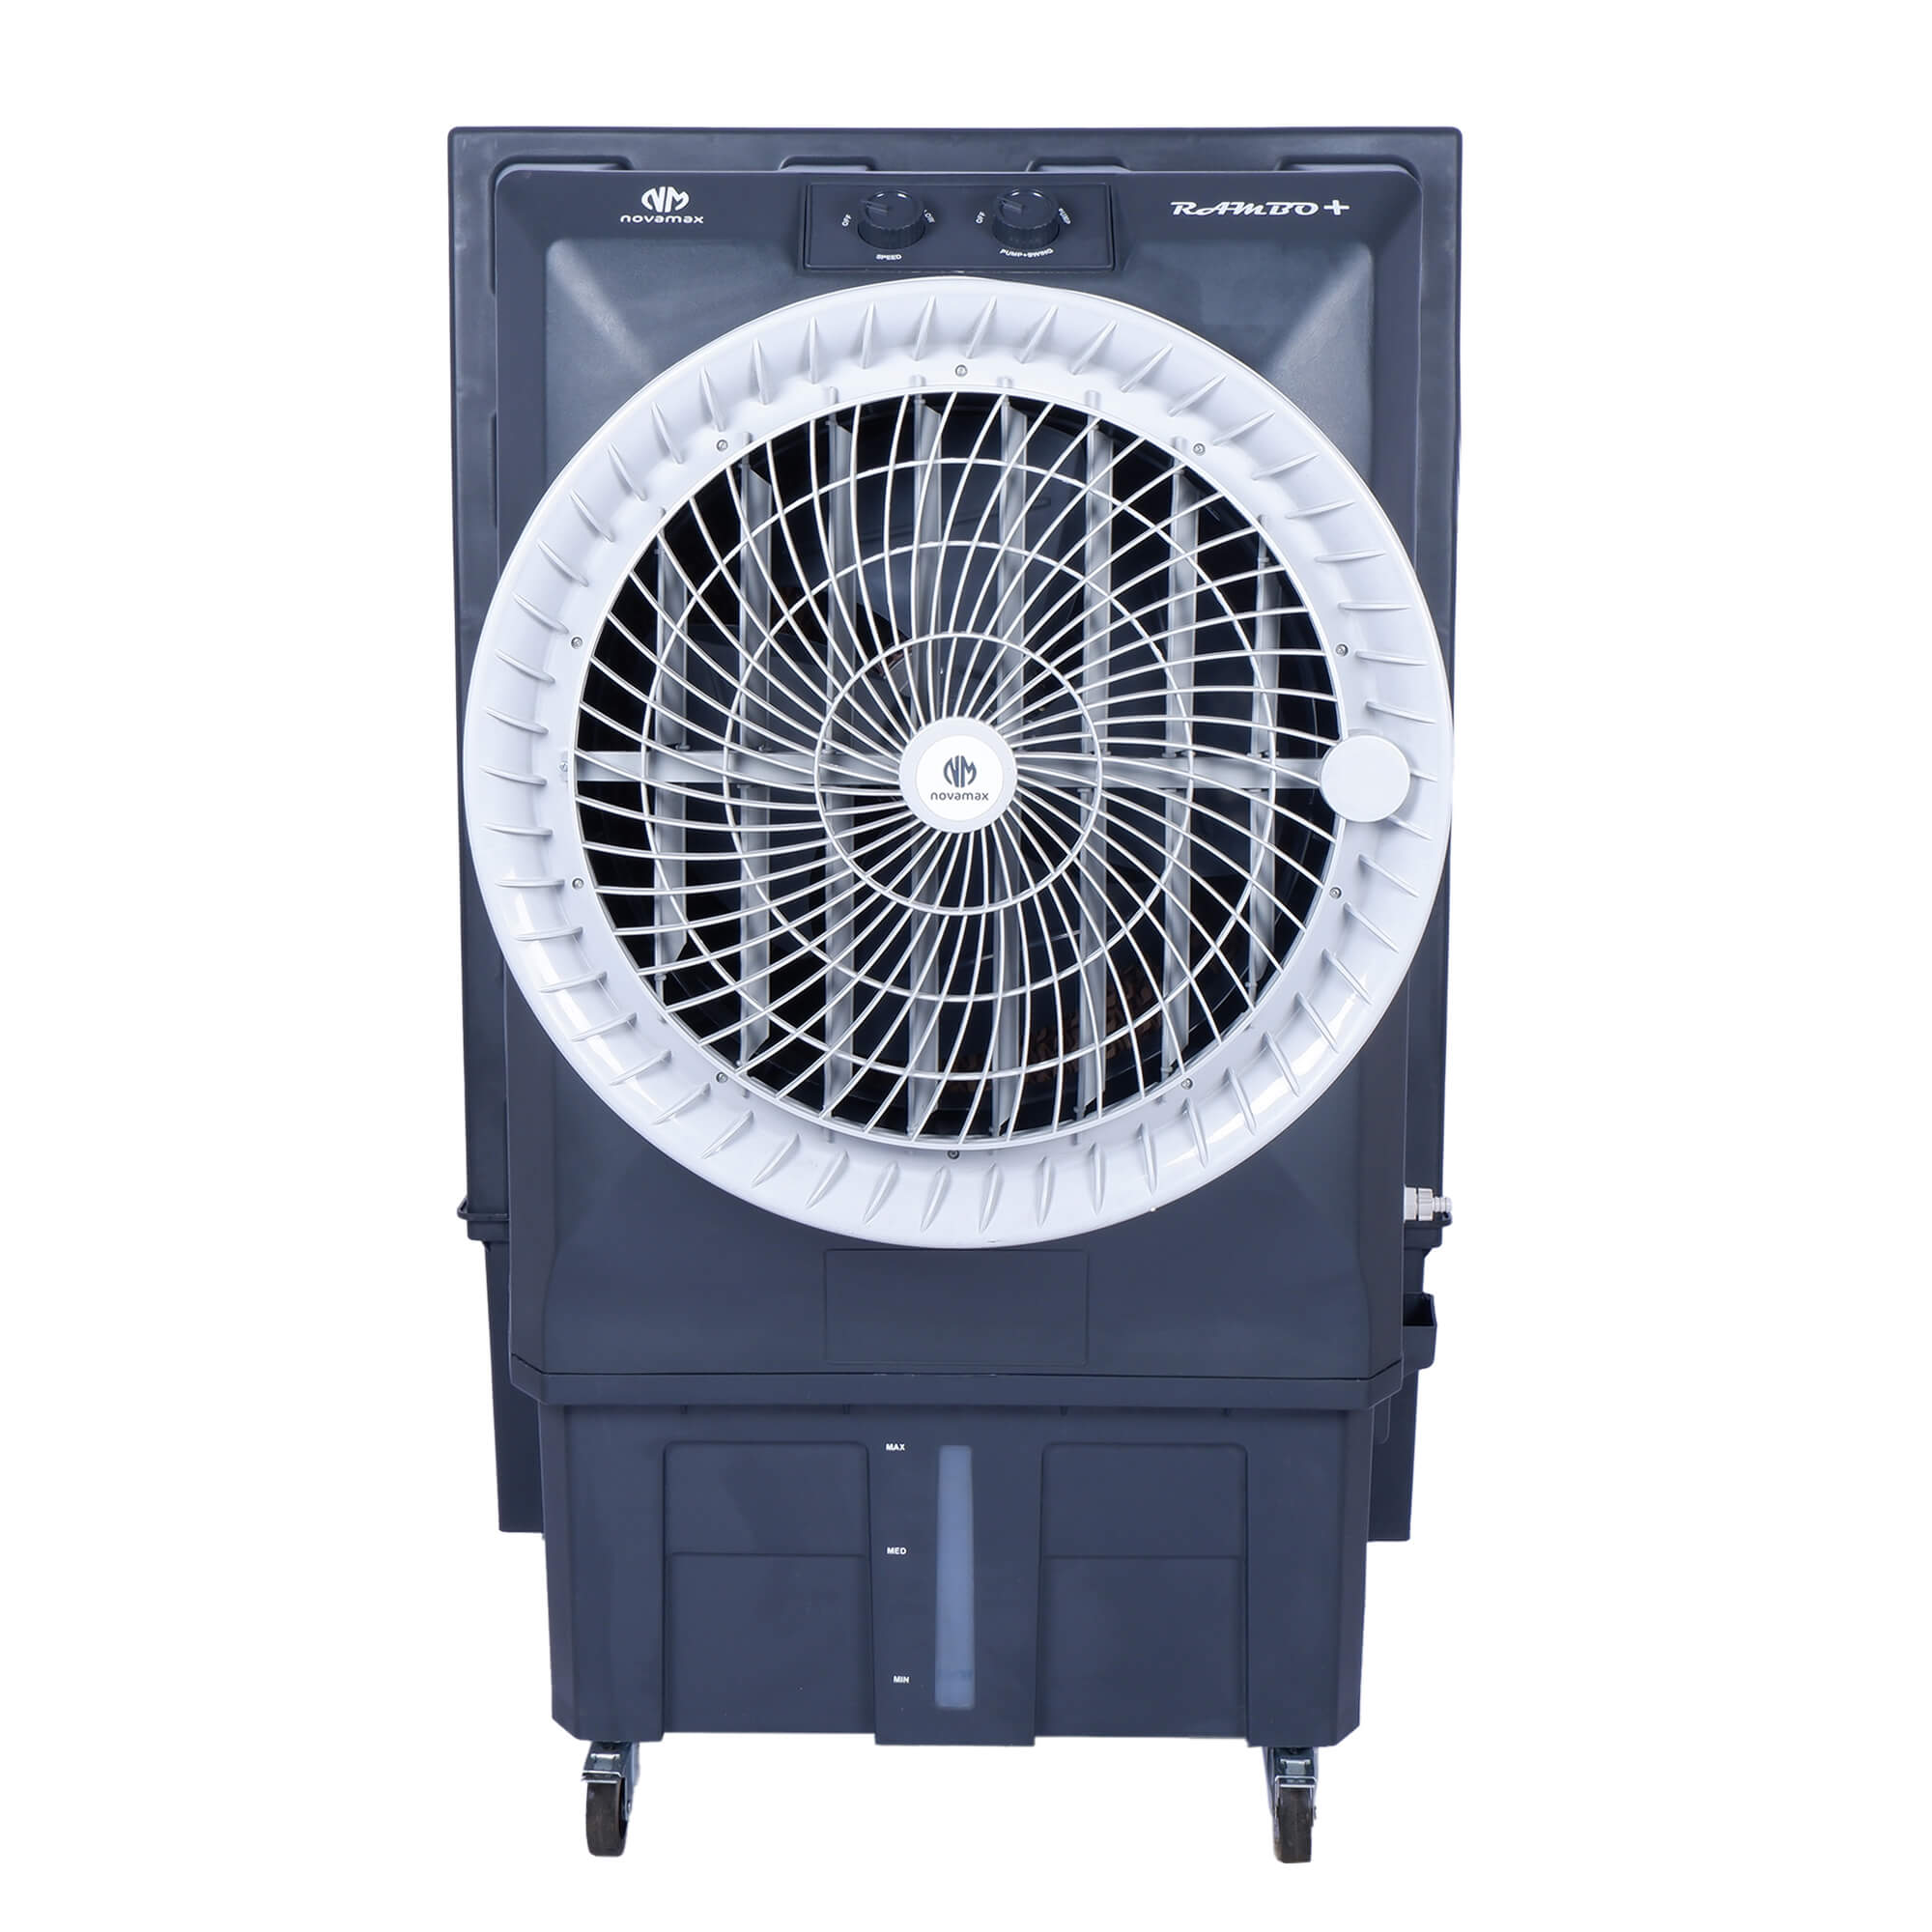 Rambo 100 Plus (Grey, Rambo 100L Desert Air Cooler With Honeycomb Cooling & Auto Swing Technology)